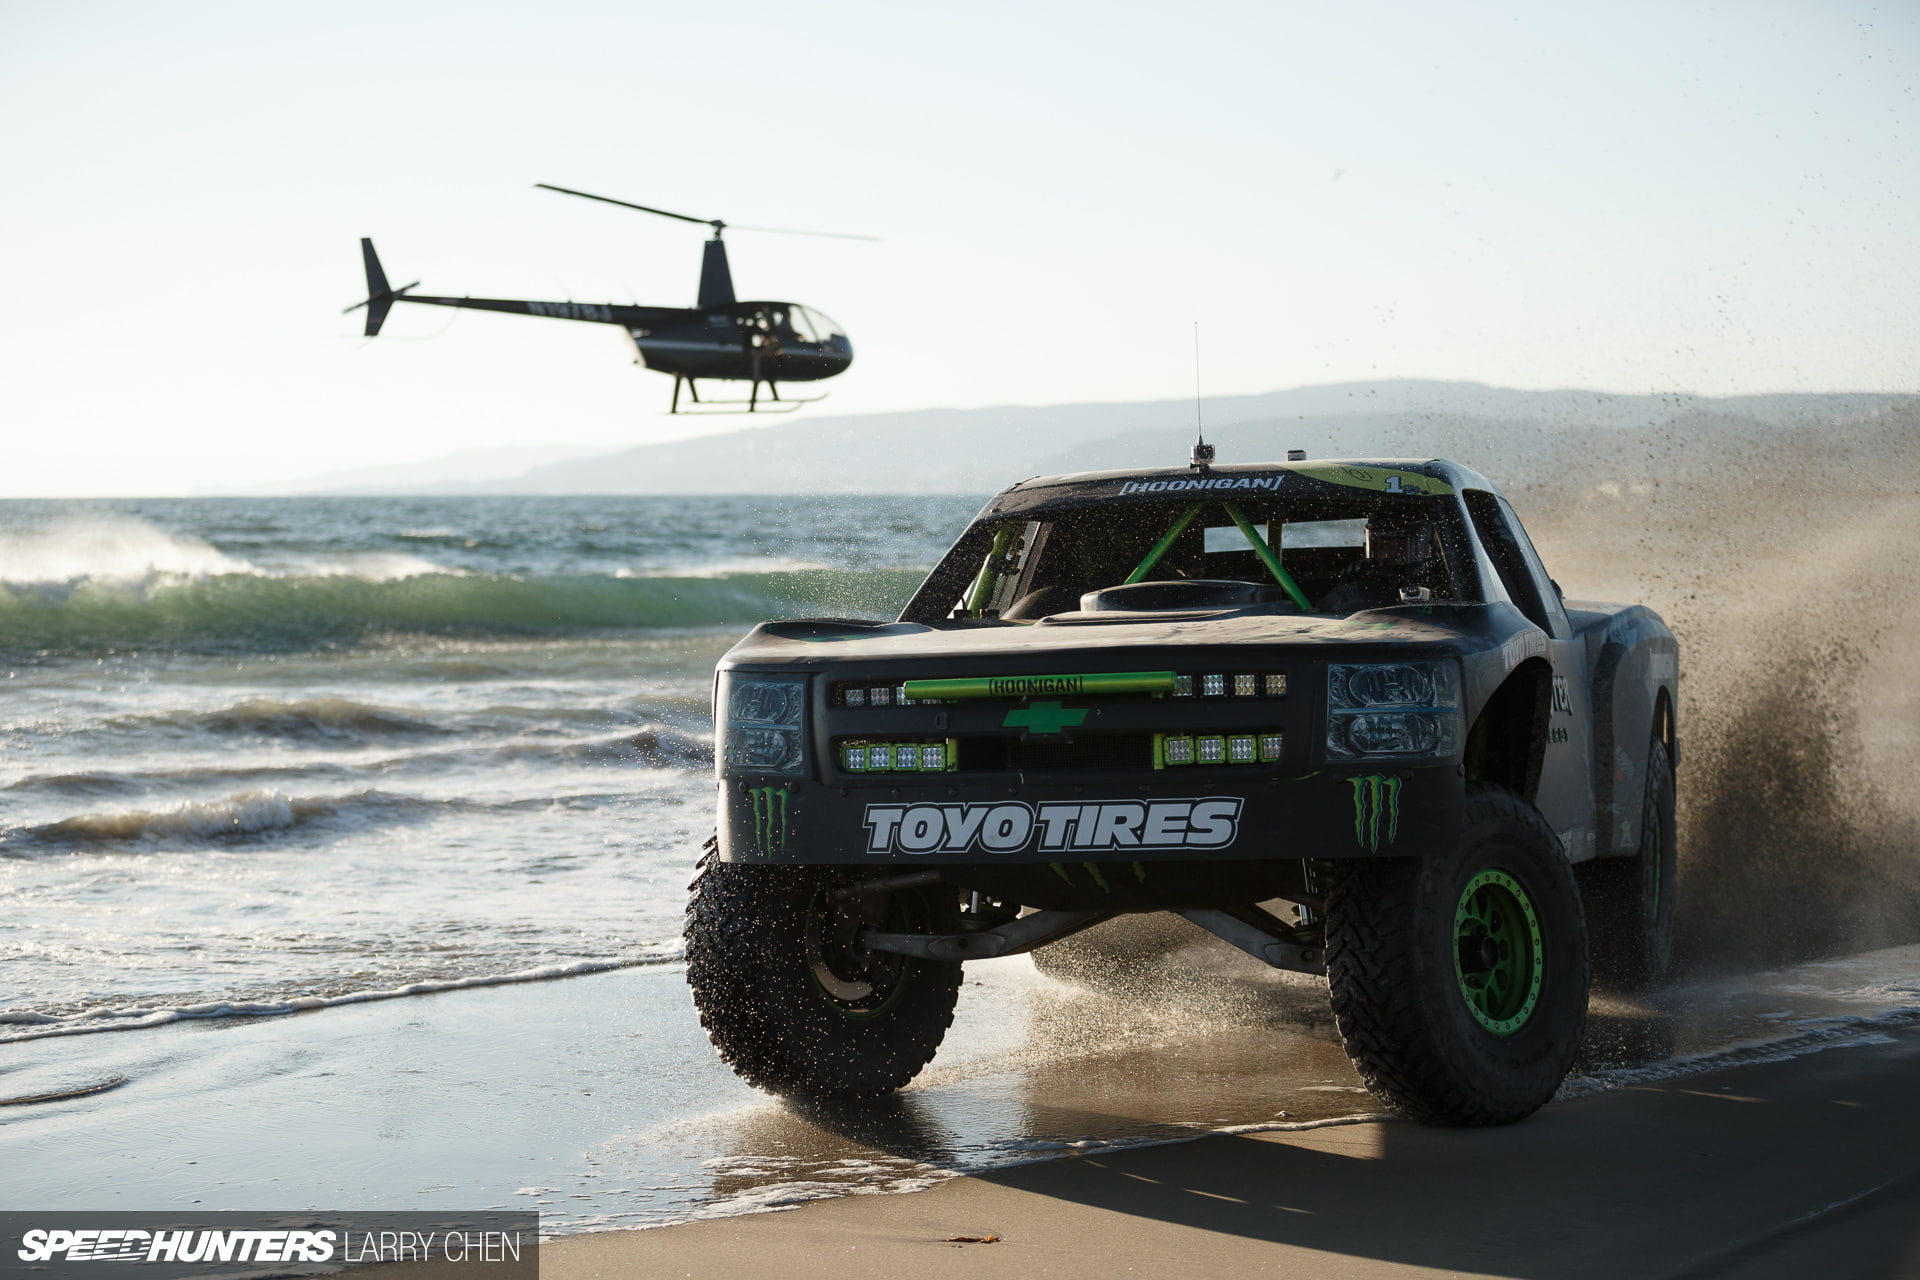 Chevrolet Silverado Trophy Truck Stop Action Beach Helicopter HD, black monster truck